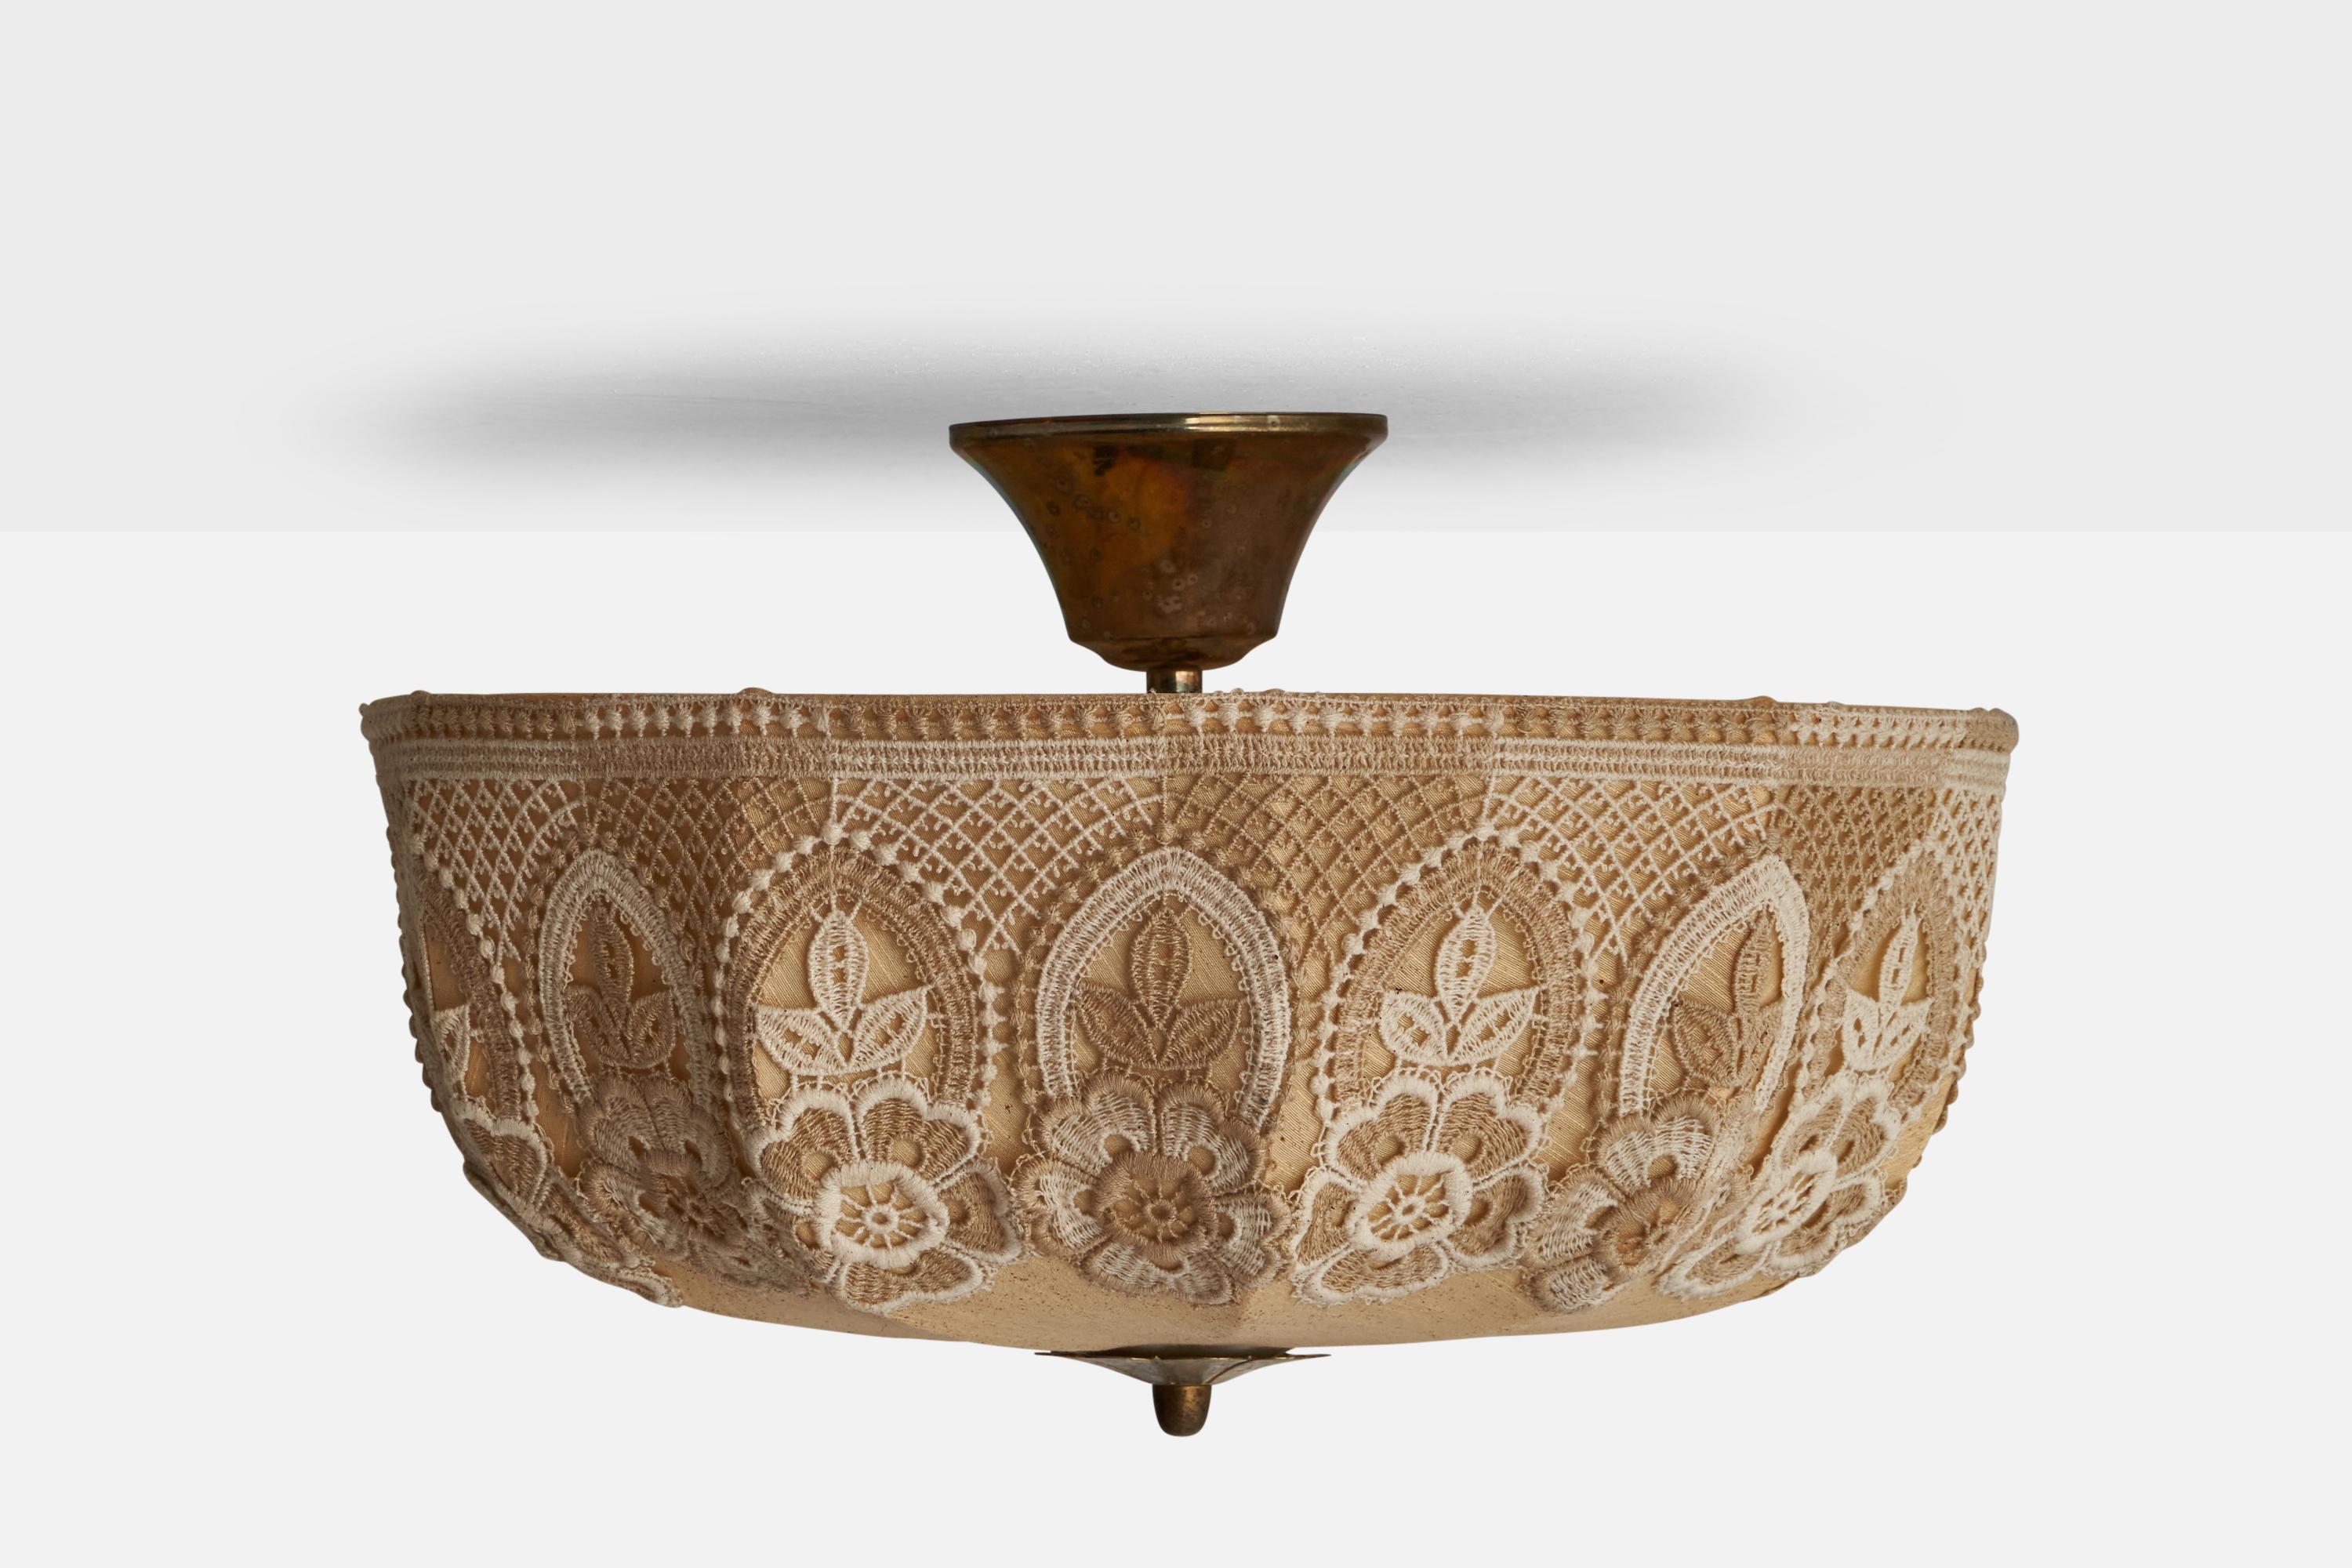 A brass and beige pendant light or semi flush mount with embroidery, designed and produced by Ståks Armatur, Moheda, Sweden, c. 1970s.

Dimensions of canopy (inches): 10” H x 16” Diameter
Socket takes standard E-26 bulbs. 2 sockets.There is no